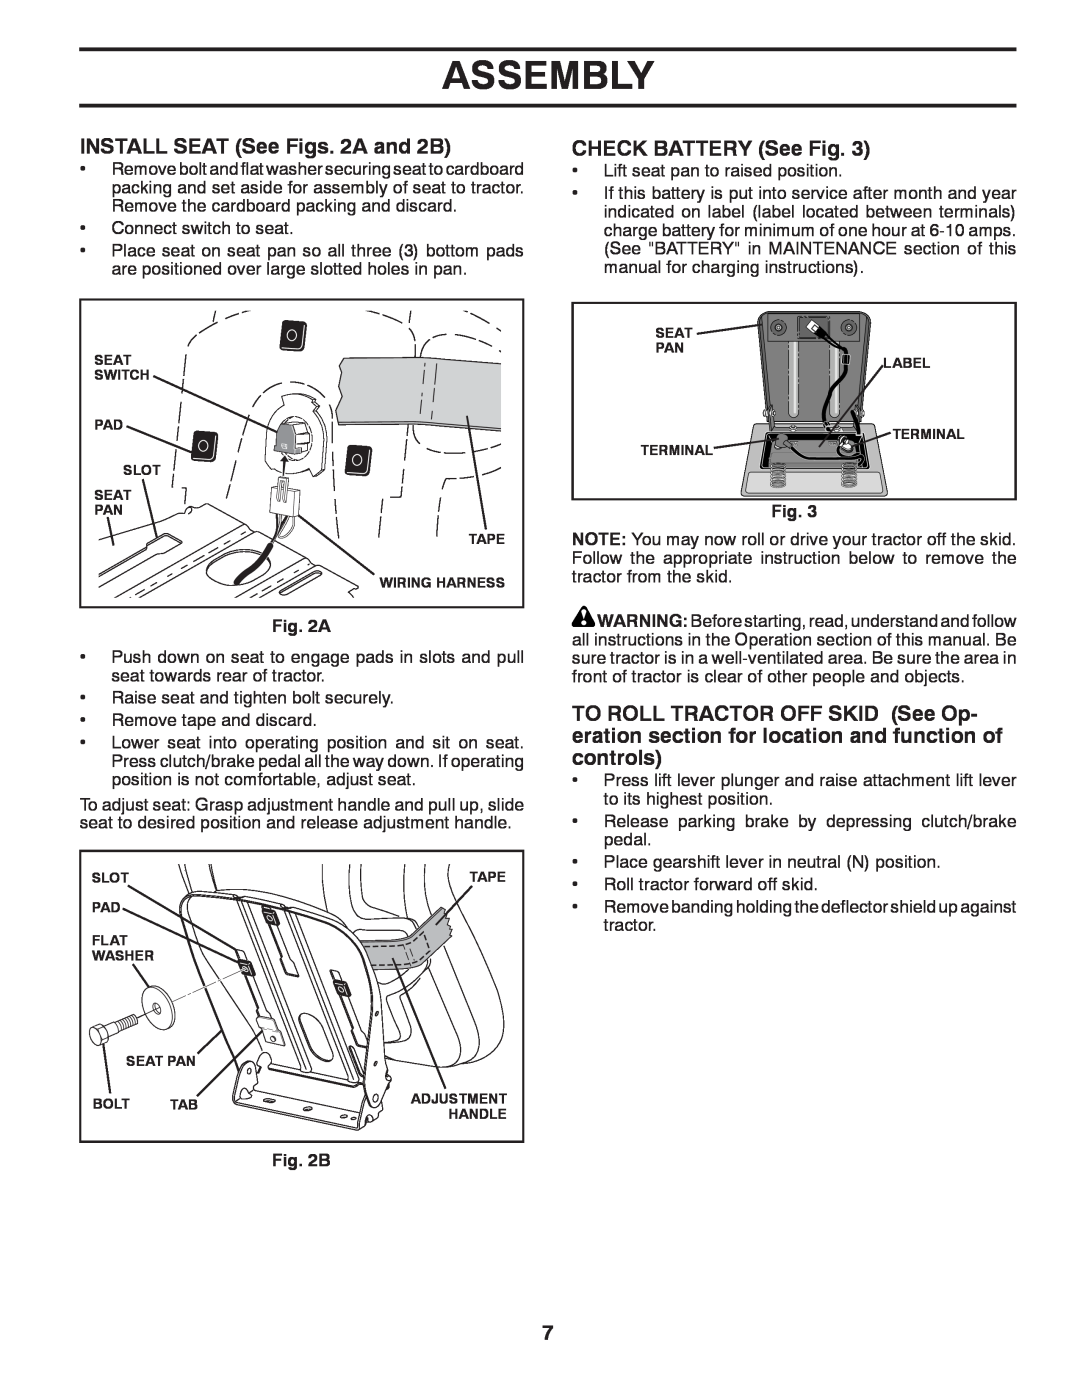 Poulan PP18542 owner manual INSTALL SEAT See Figs. 2A and 2B, CHECK BATTERY See Fig, Assembly 